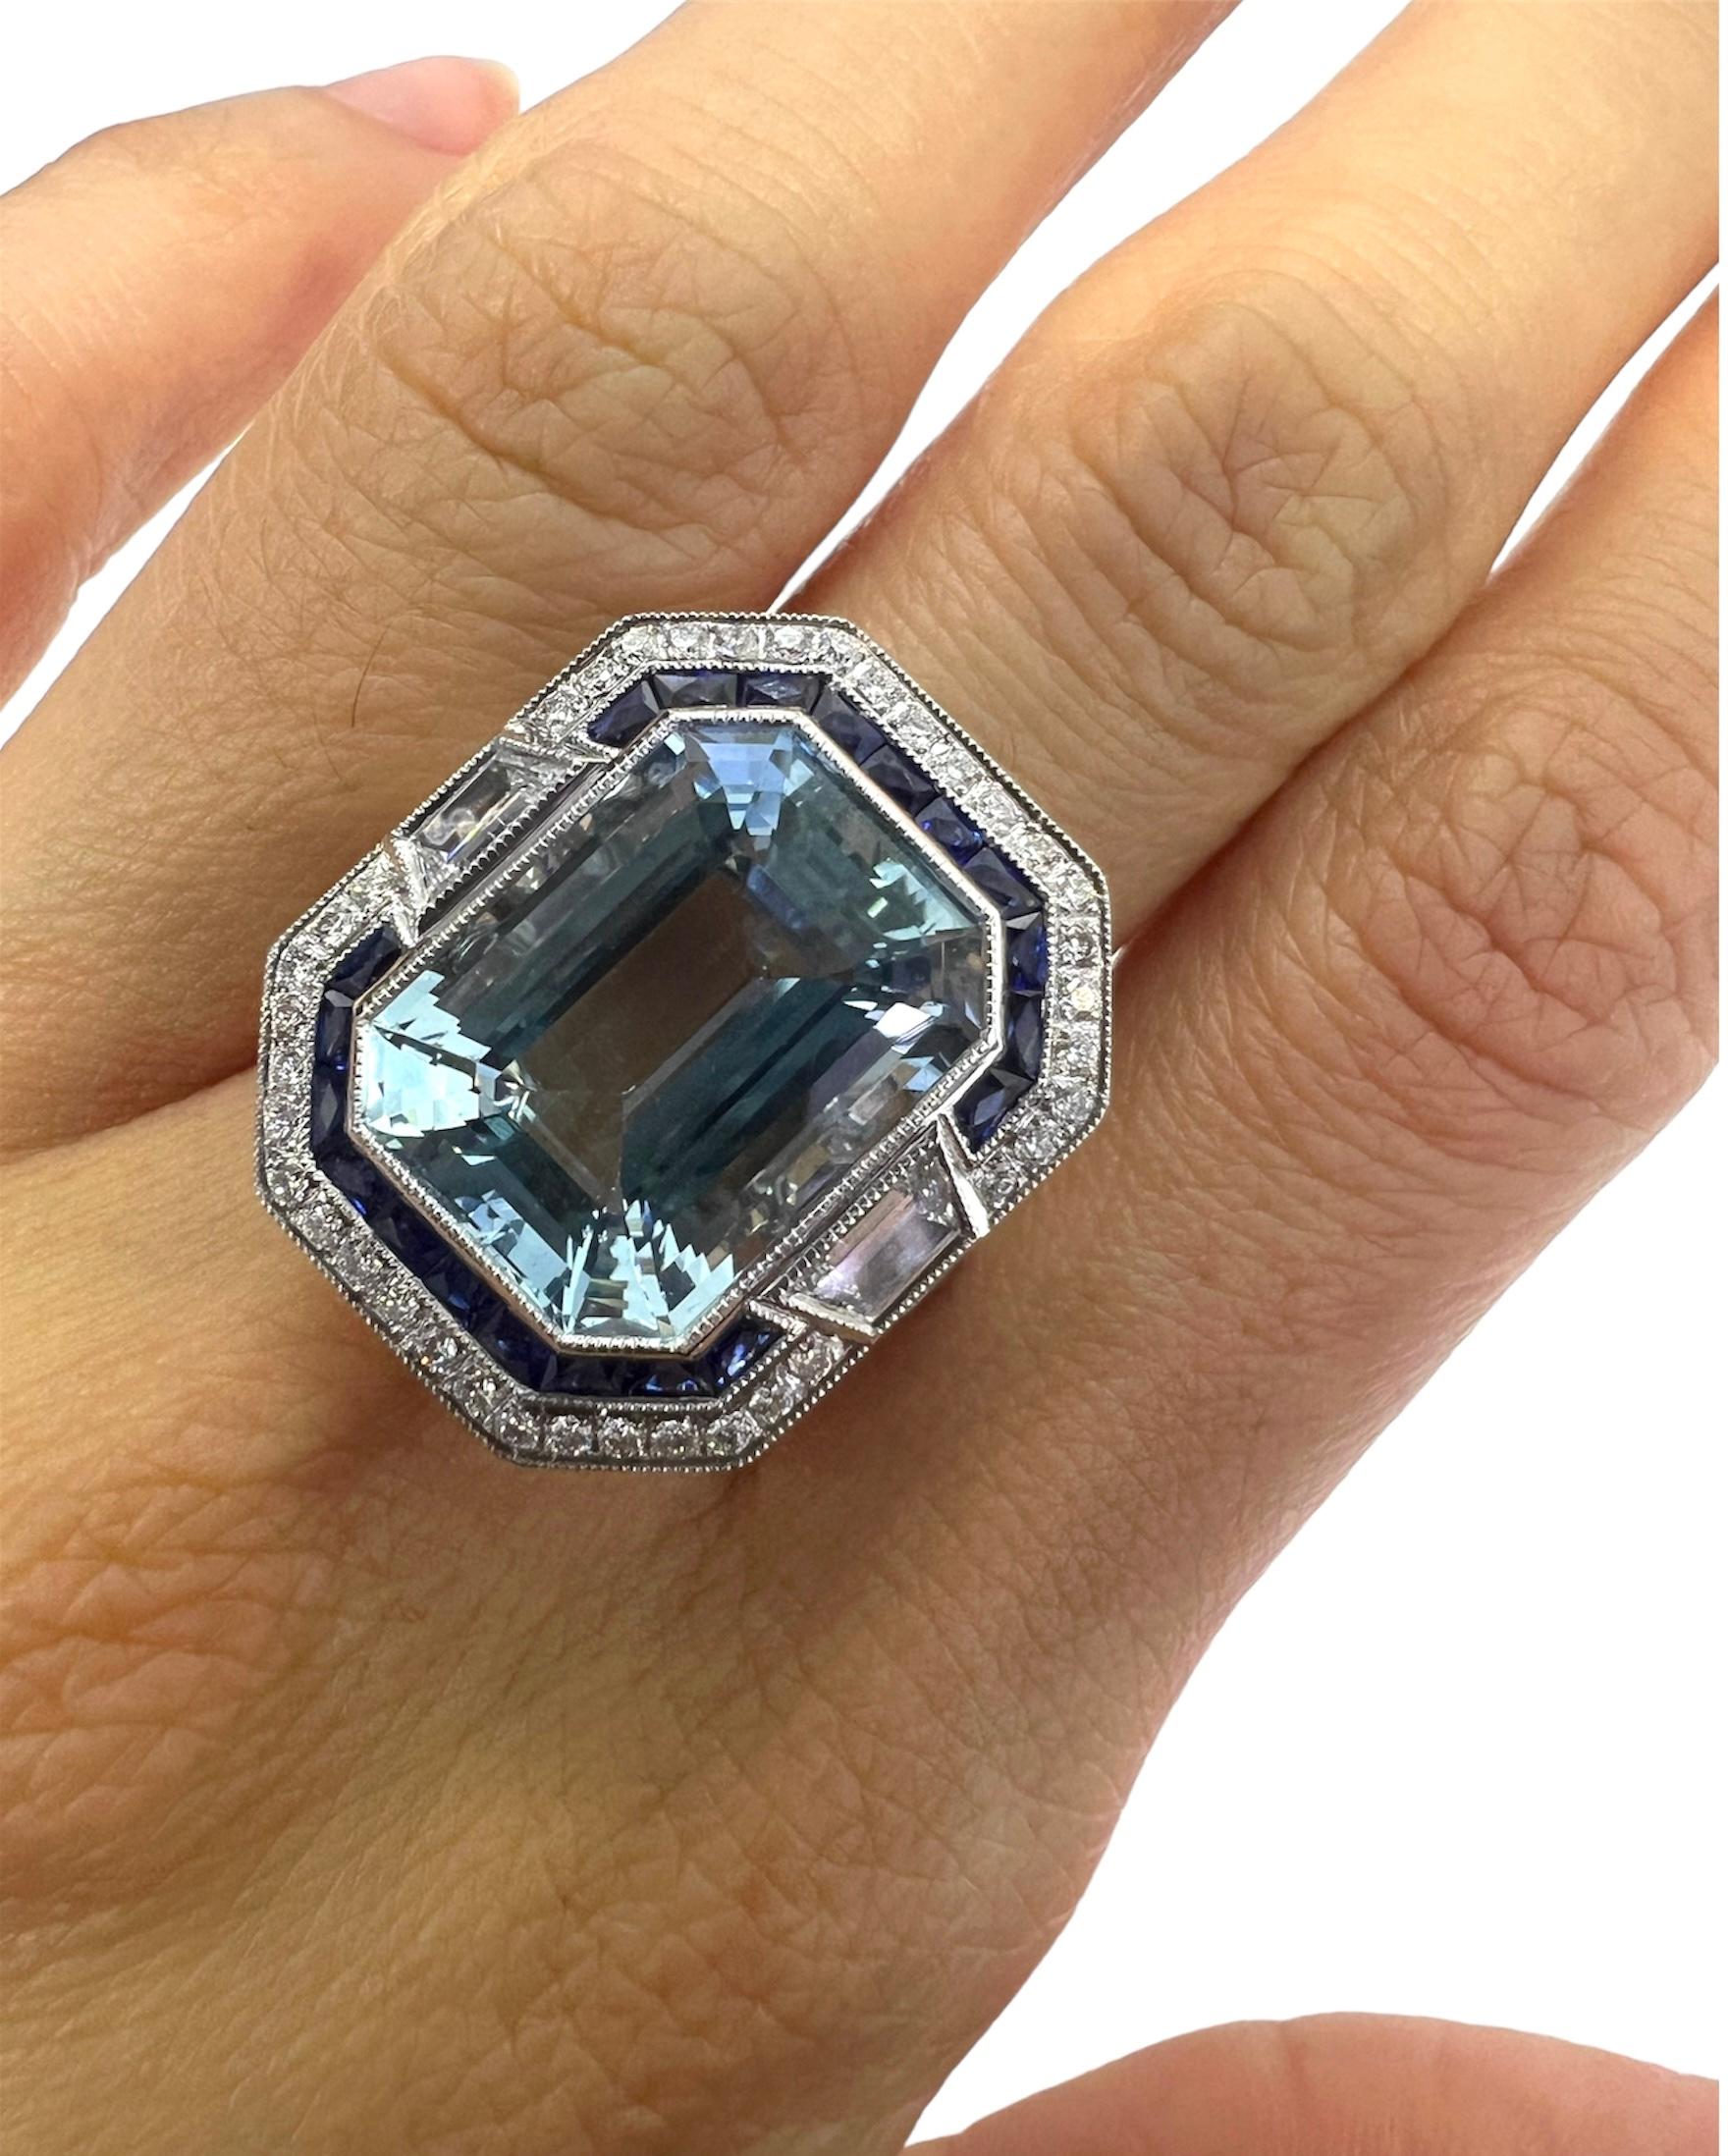 Platinum ring with 8.52 carat aquamarine, 0.60 carat sapphire and 1.04 carat diamond. 

Sophia D by Joseph Dardashti LTD has been known worldwide for 35 years and are inspired by classic Art Deco design that merges with modern manufacturing